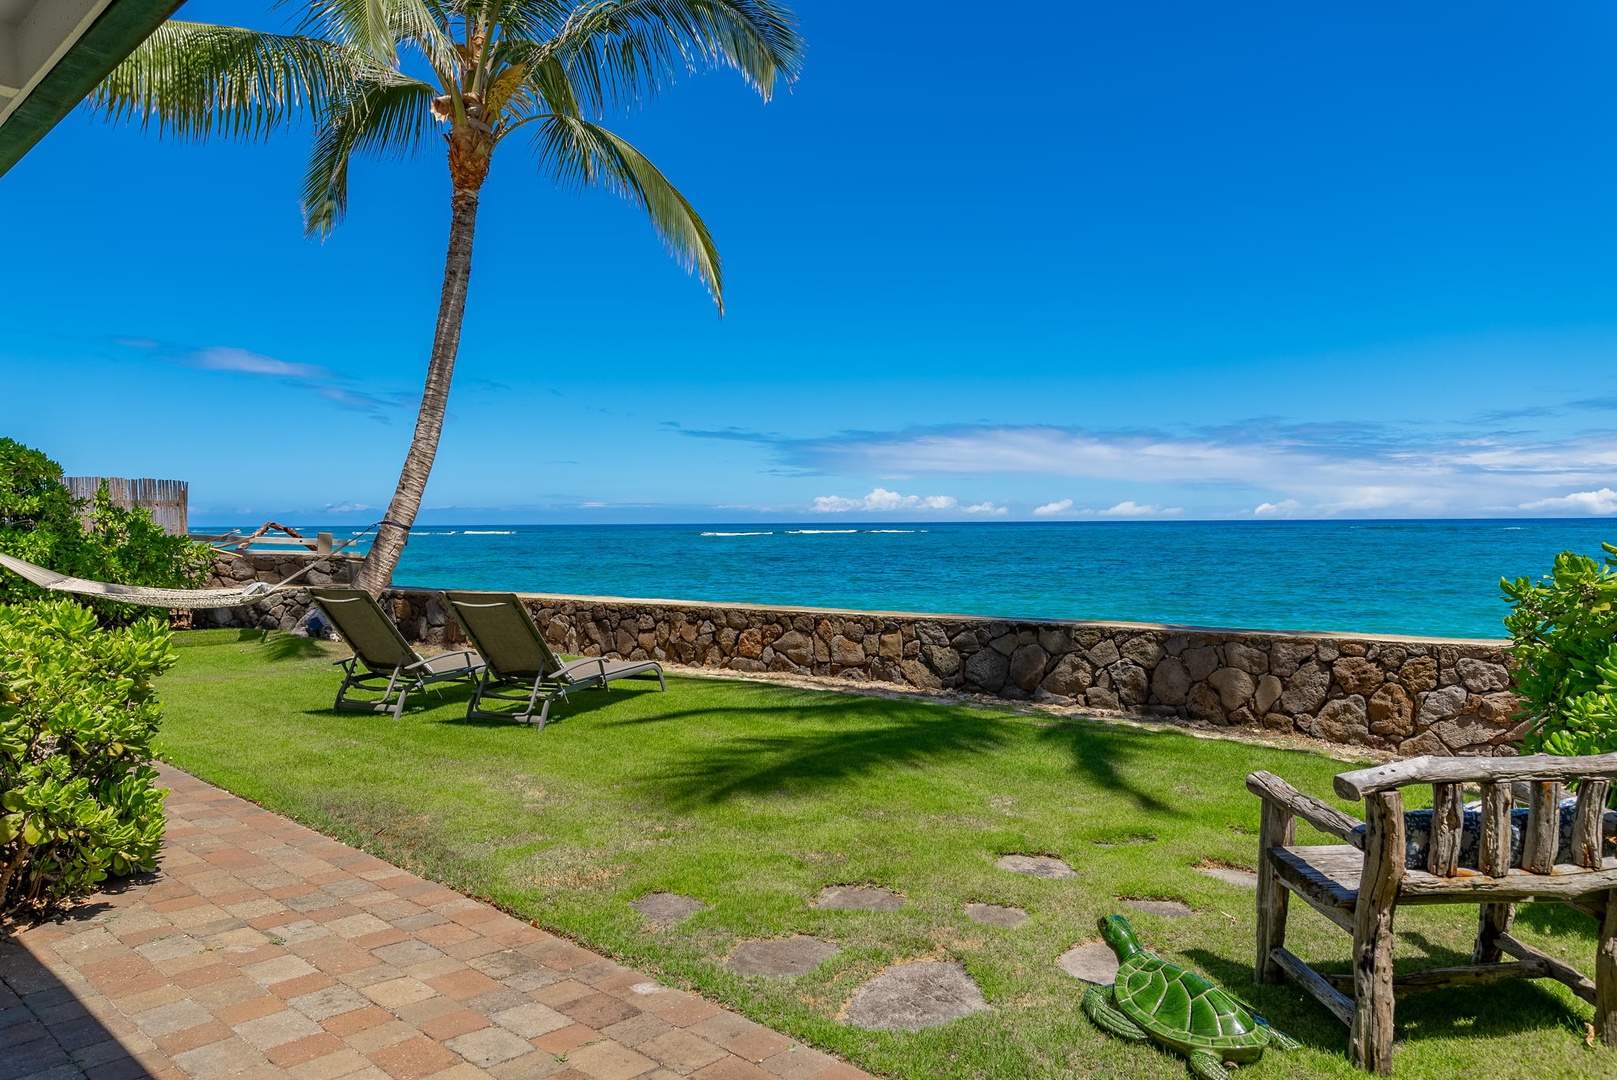 Waialua Vacation Rentals, Hale Oka Nunu - Lay back and relax with the sounds of the waves crashing and the gentle ocean breeze